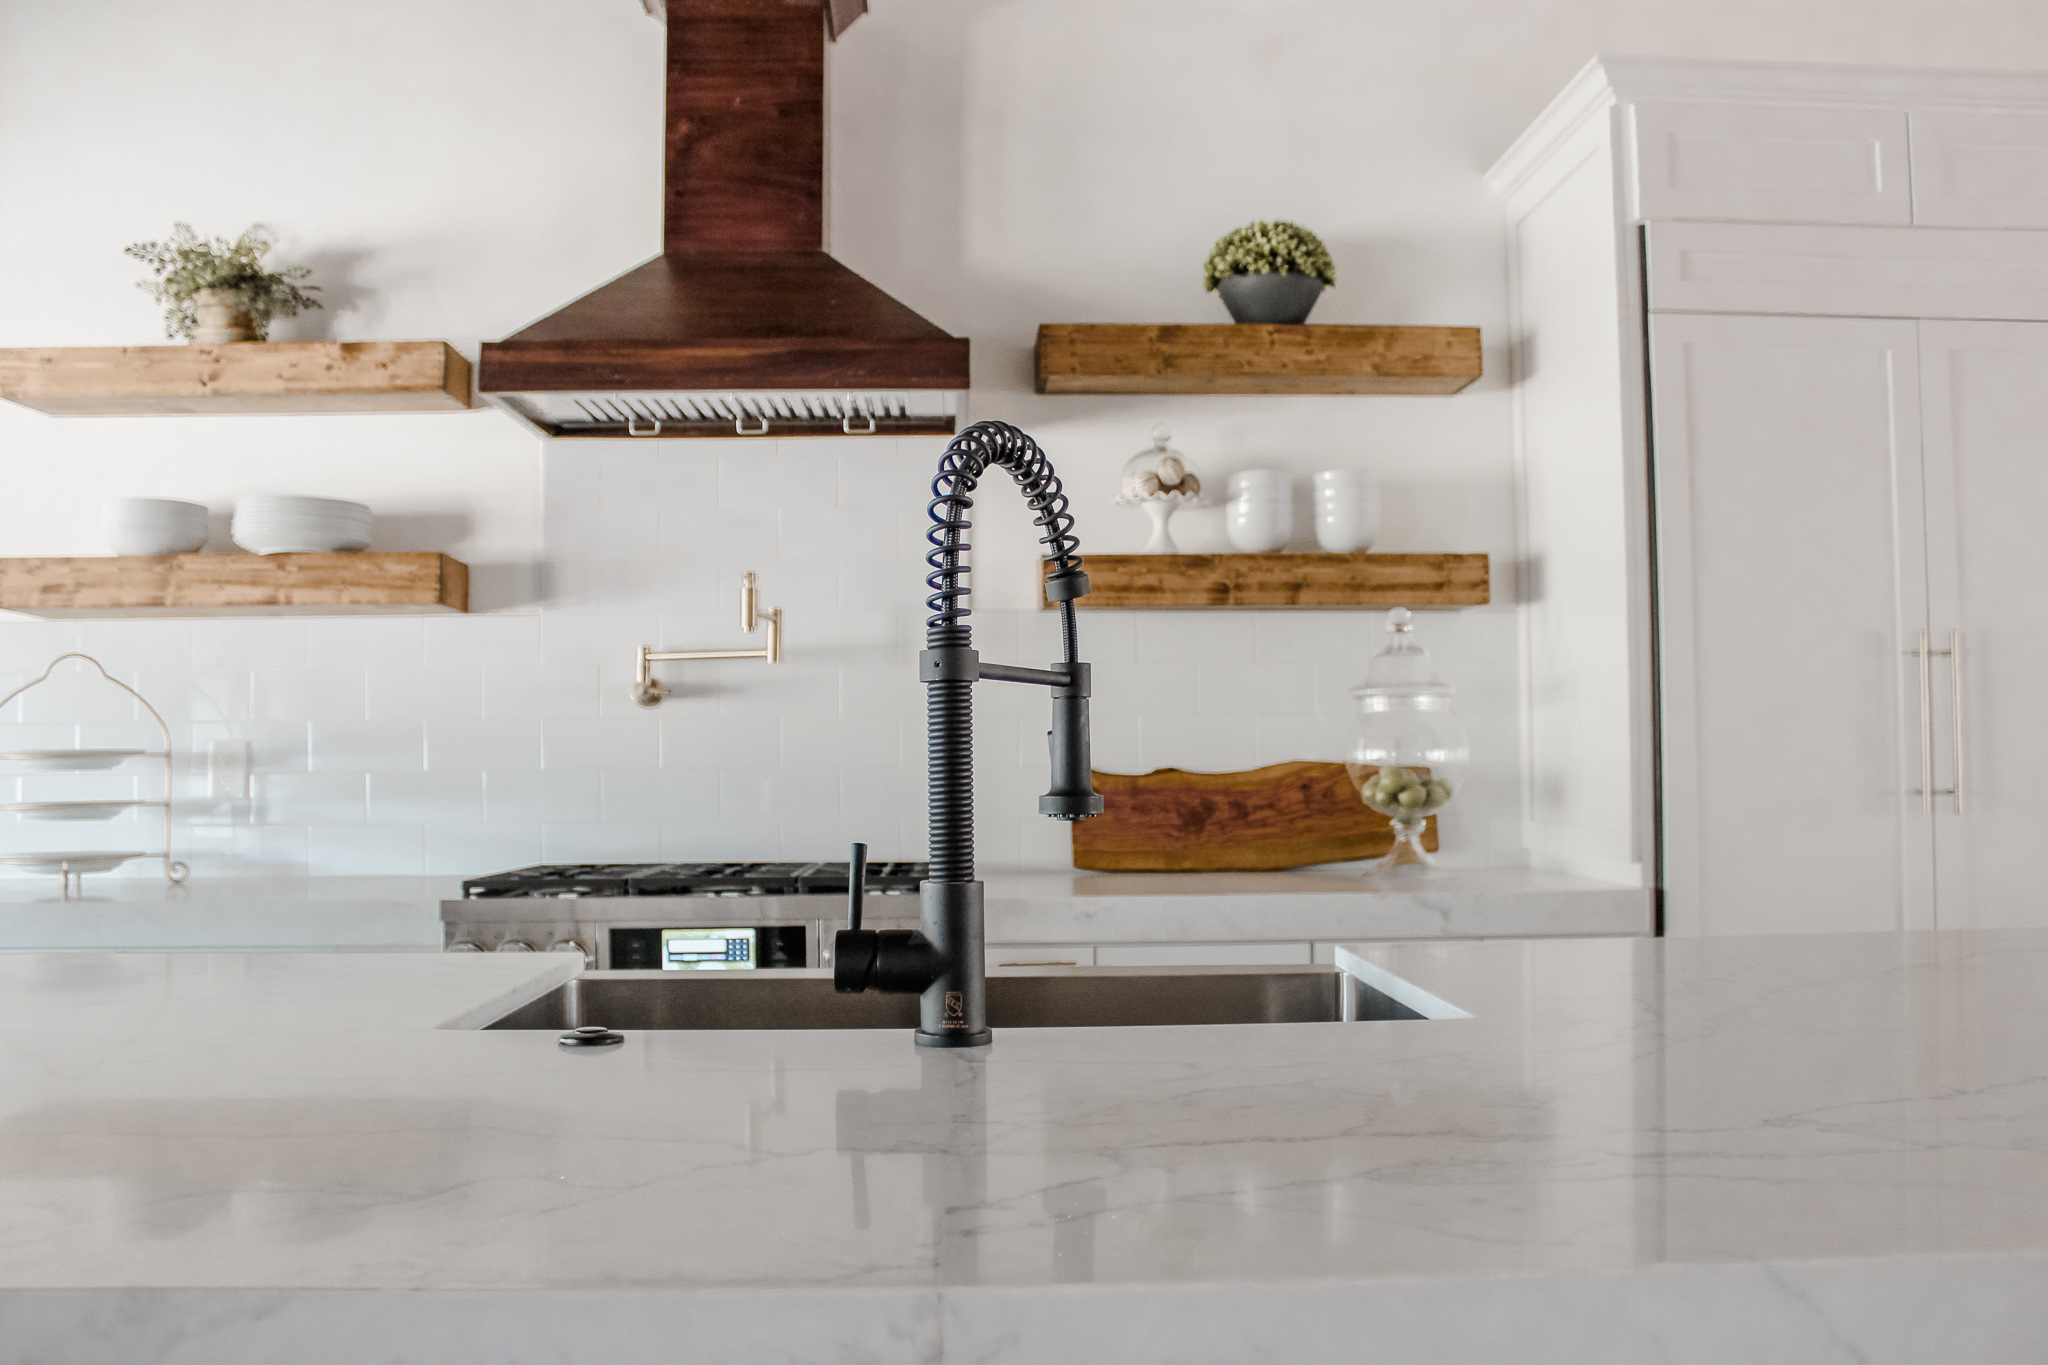  FRESH AND INNOVATIVE KITCHEN DESIGN IDEAS | VIGO Industries - Kitchen Sinks and Faucets - Home Interior 